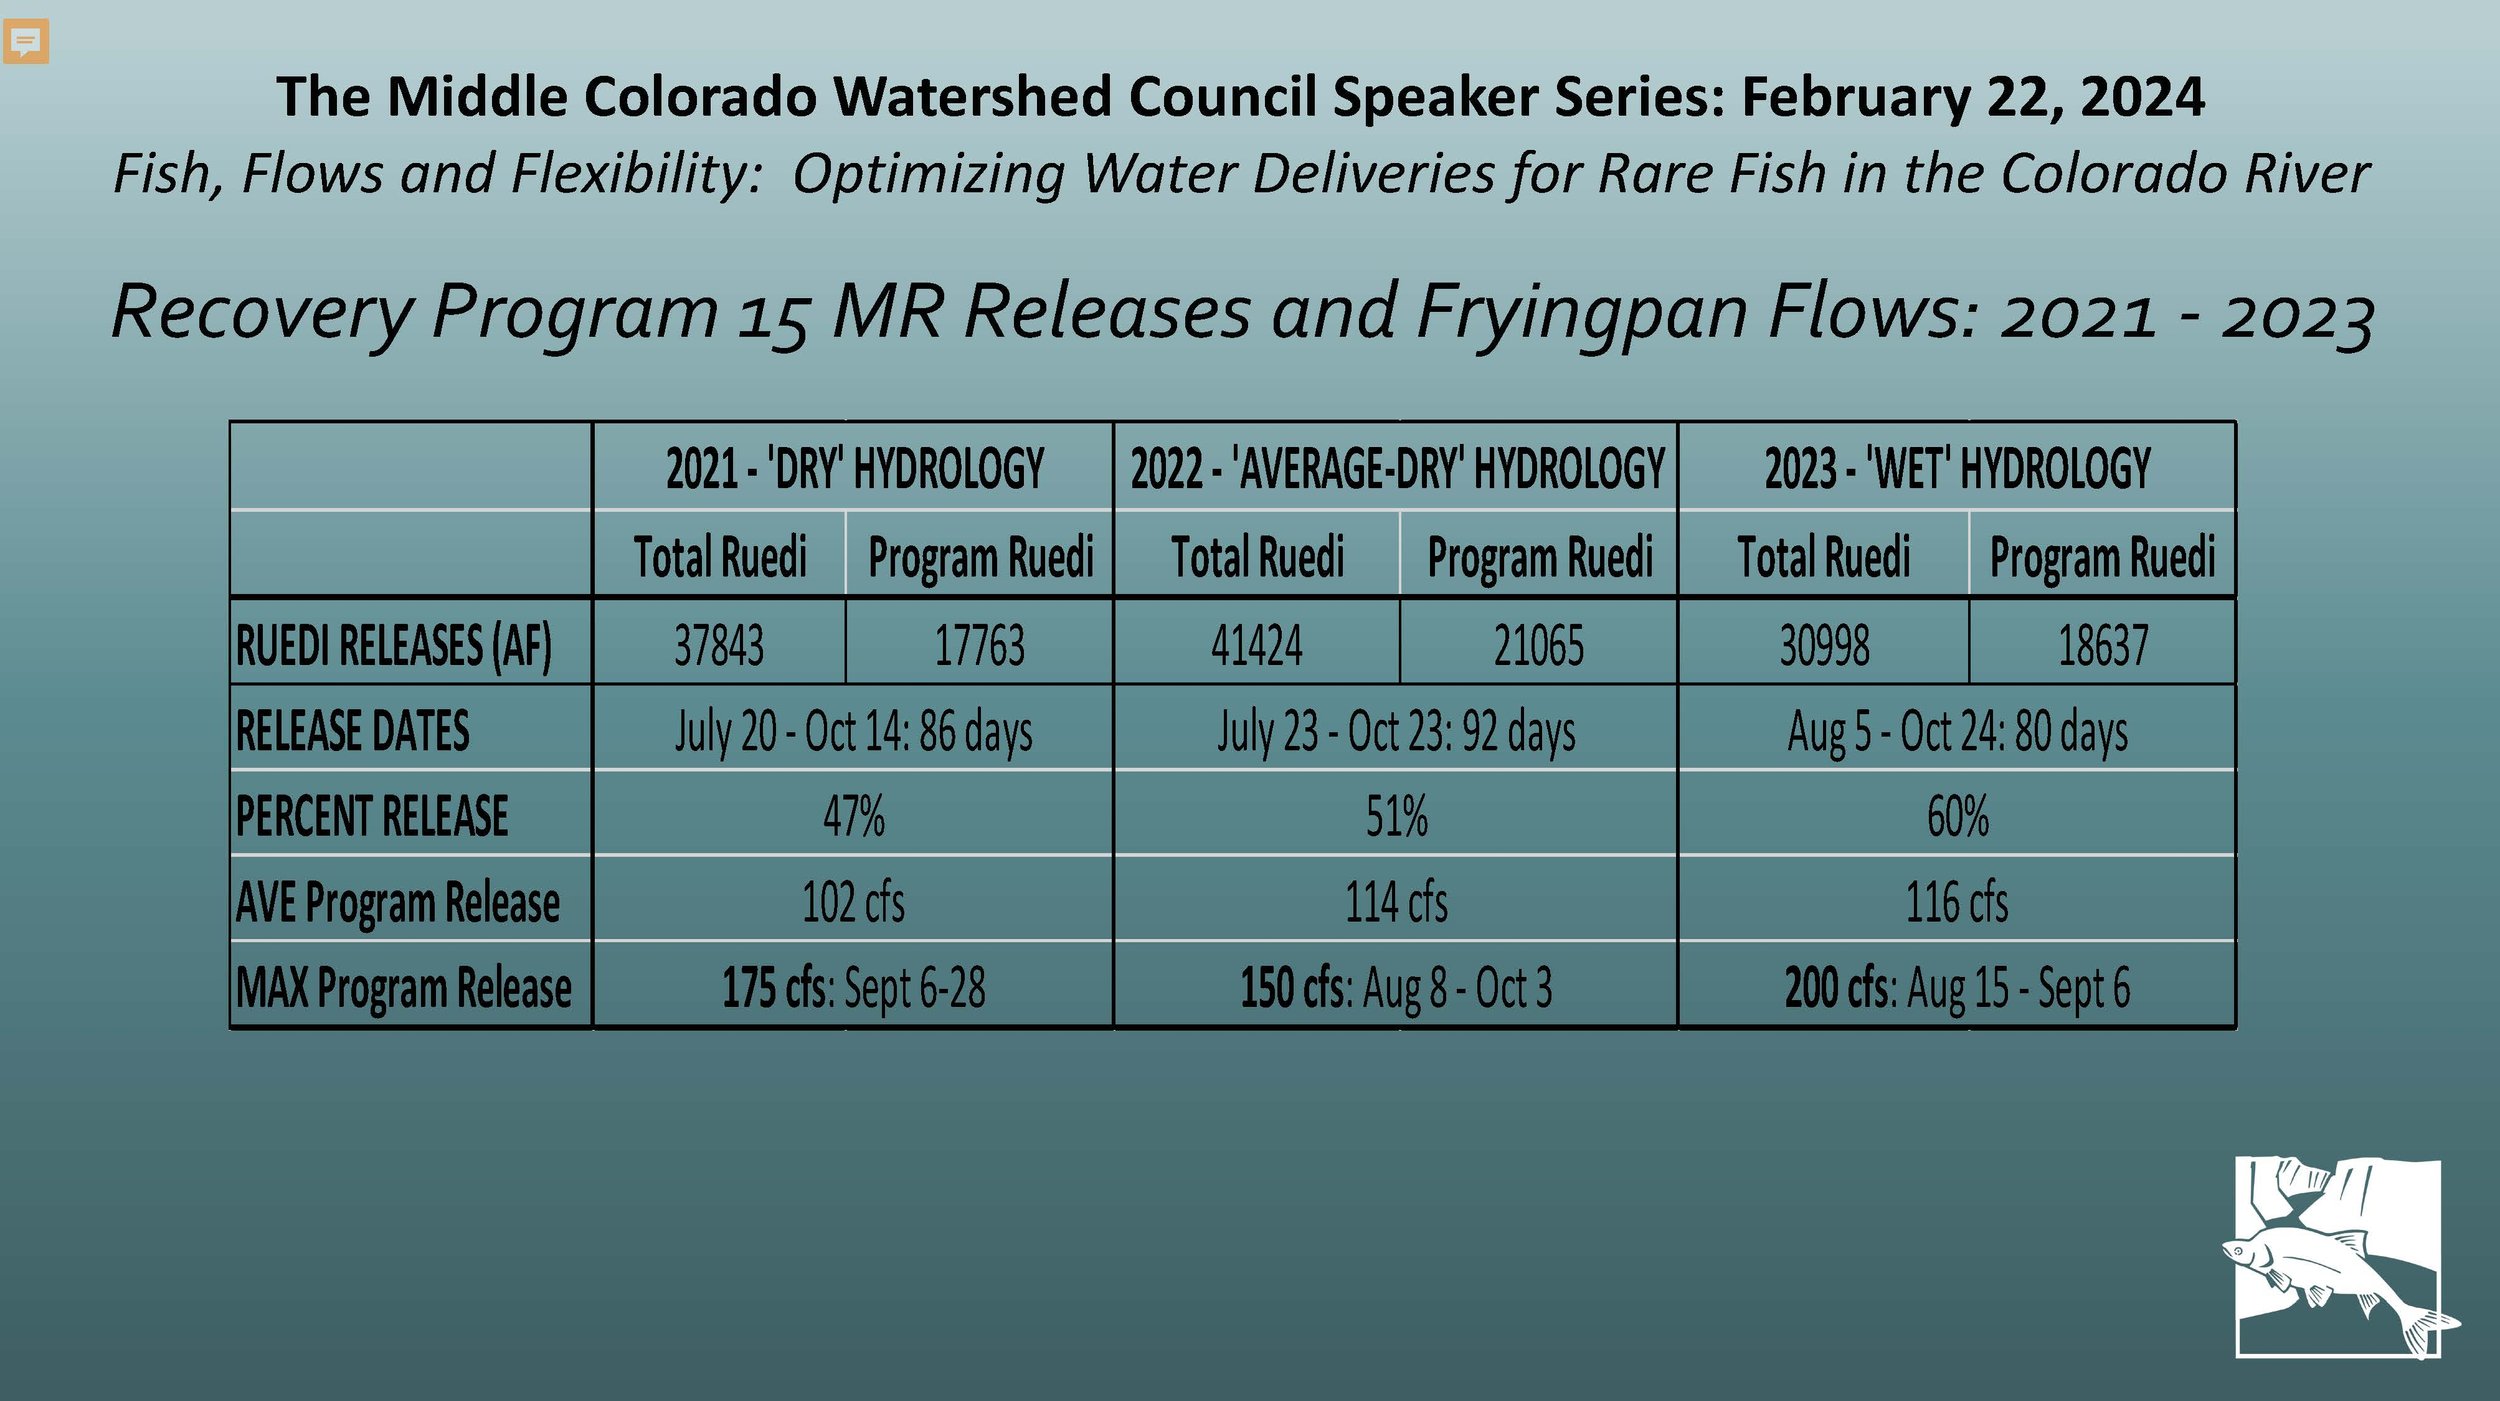 DGraf_ Fish Recovery Program_MCWC_2-22-2024_reduced_Page_37.jpg